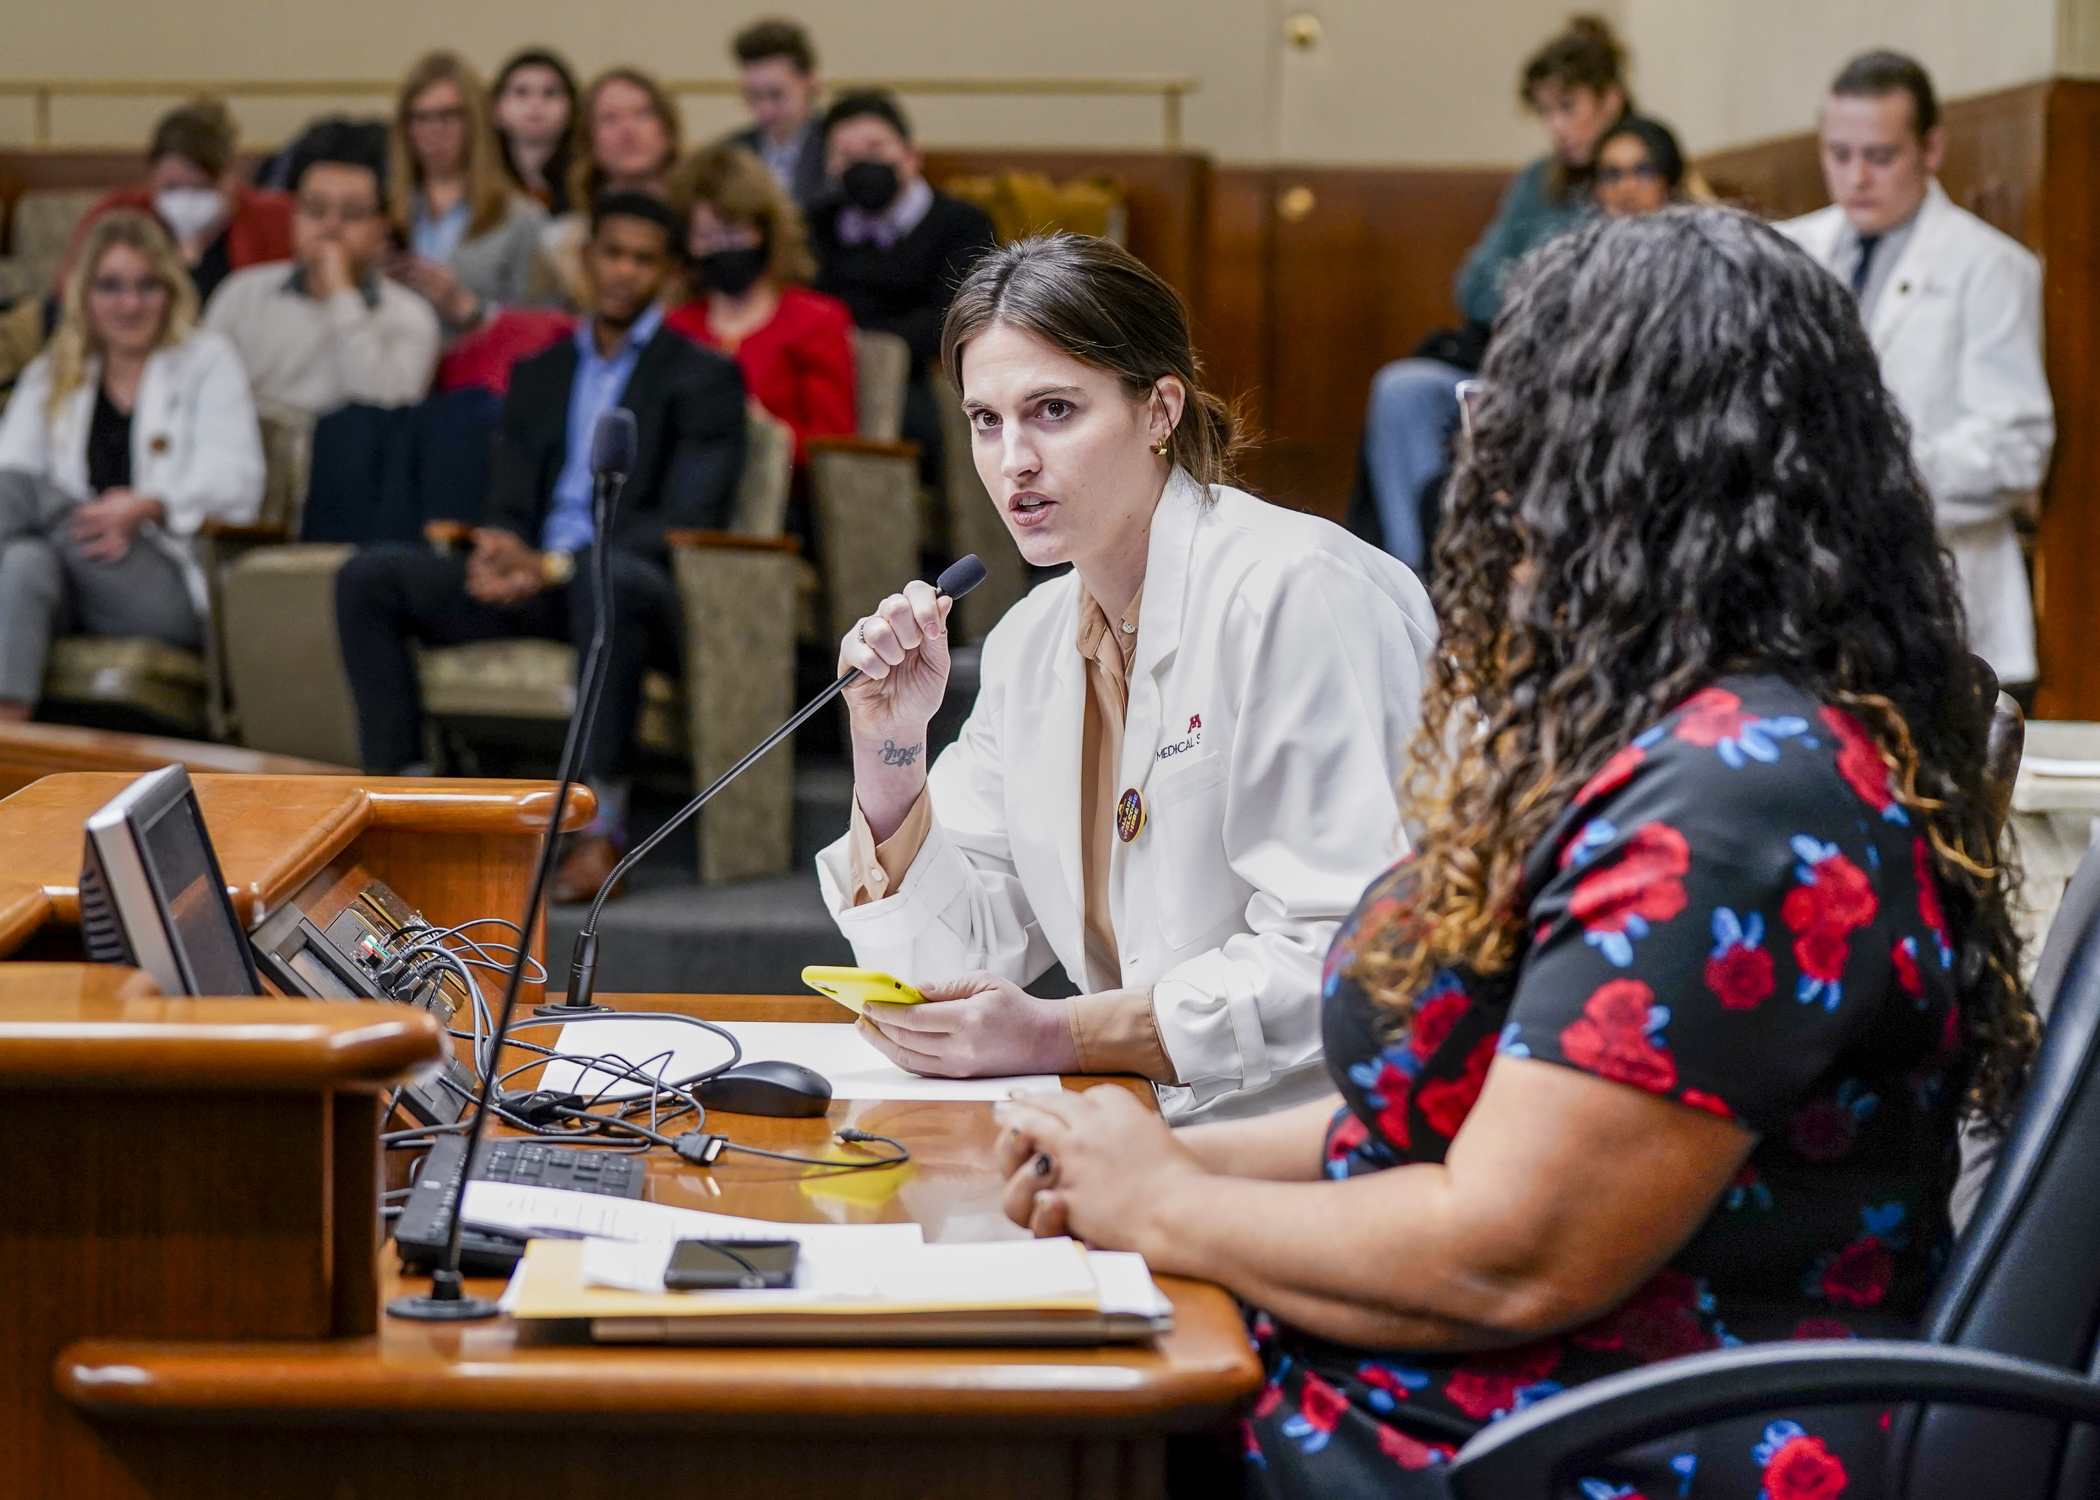 University of Minnesota medical student Macie Darden testifies Jan. 18 before the House Human Services Policy Committee in support of HF16 that would prohibit conversion therapy for children or vulnerable adults. (Photo by Catherine Davis)